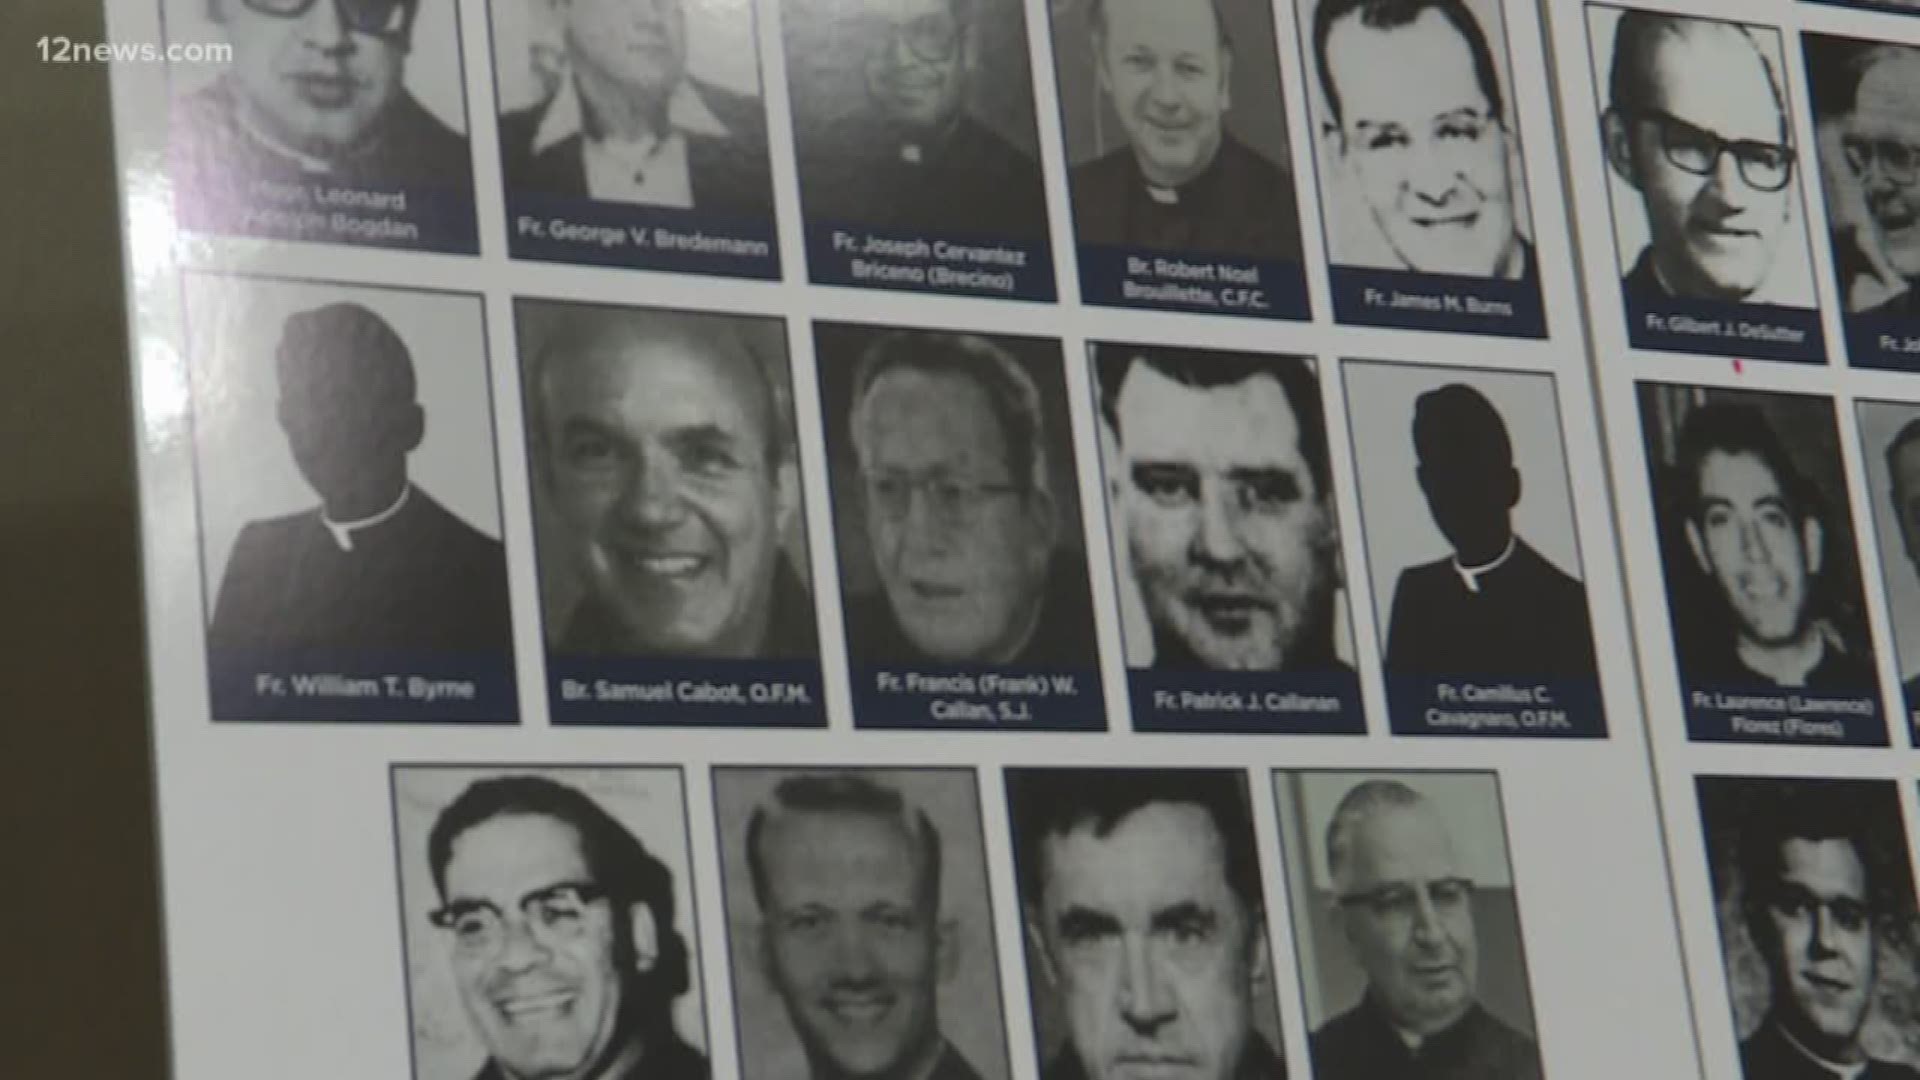 Firm releases report naming 109 clerics accused of sex abuse in Diocese of Phoenix 12news pic